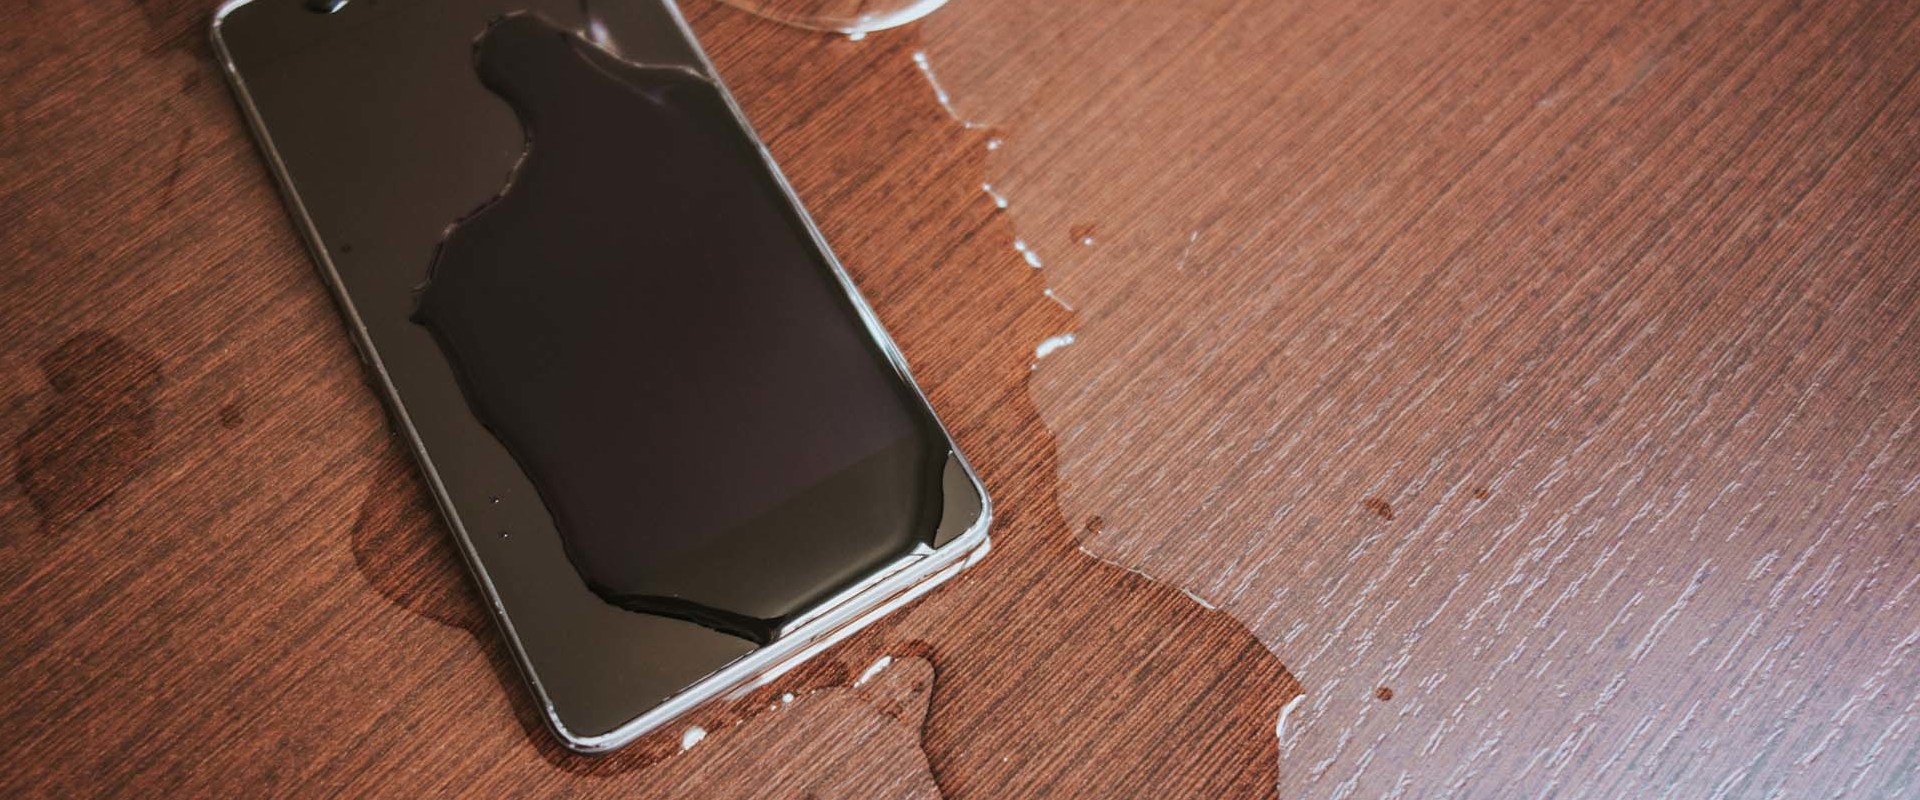 Fixing Physical Damages: A Comprehensive Guide to Repair Cracked Screens